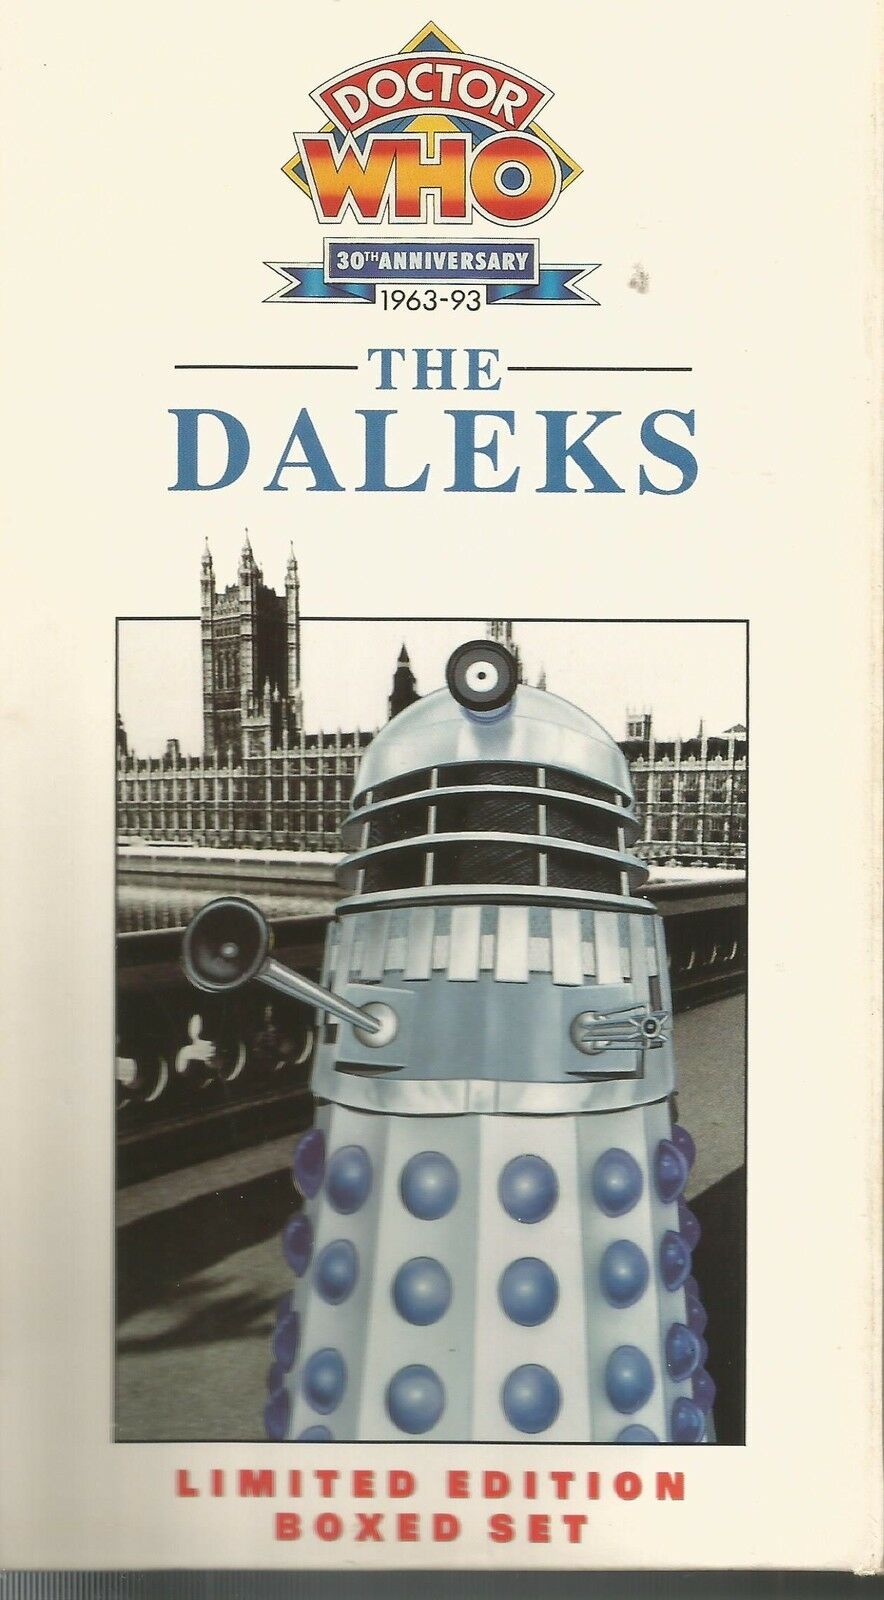 US cover for the boxed set